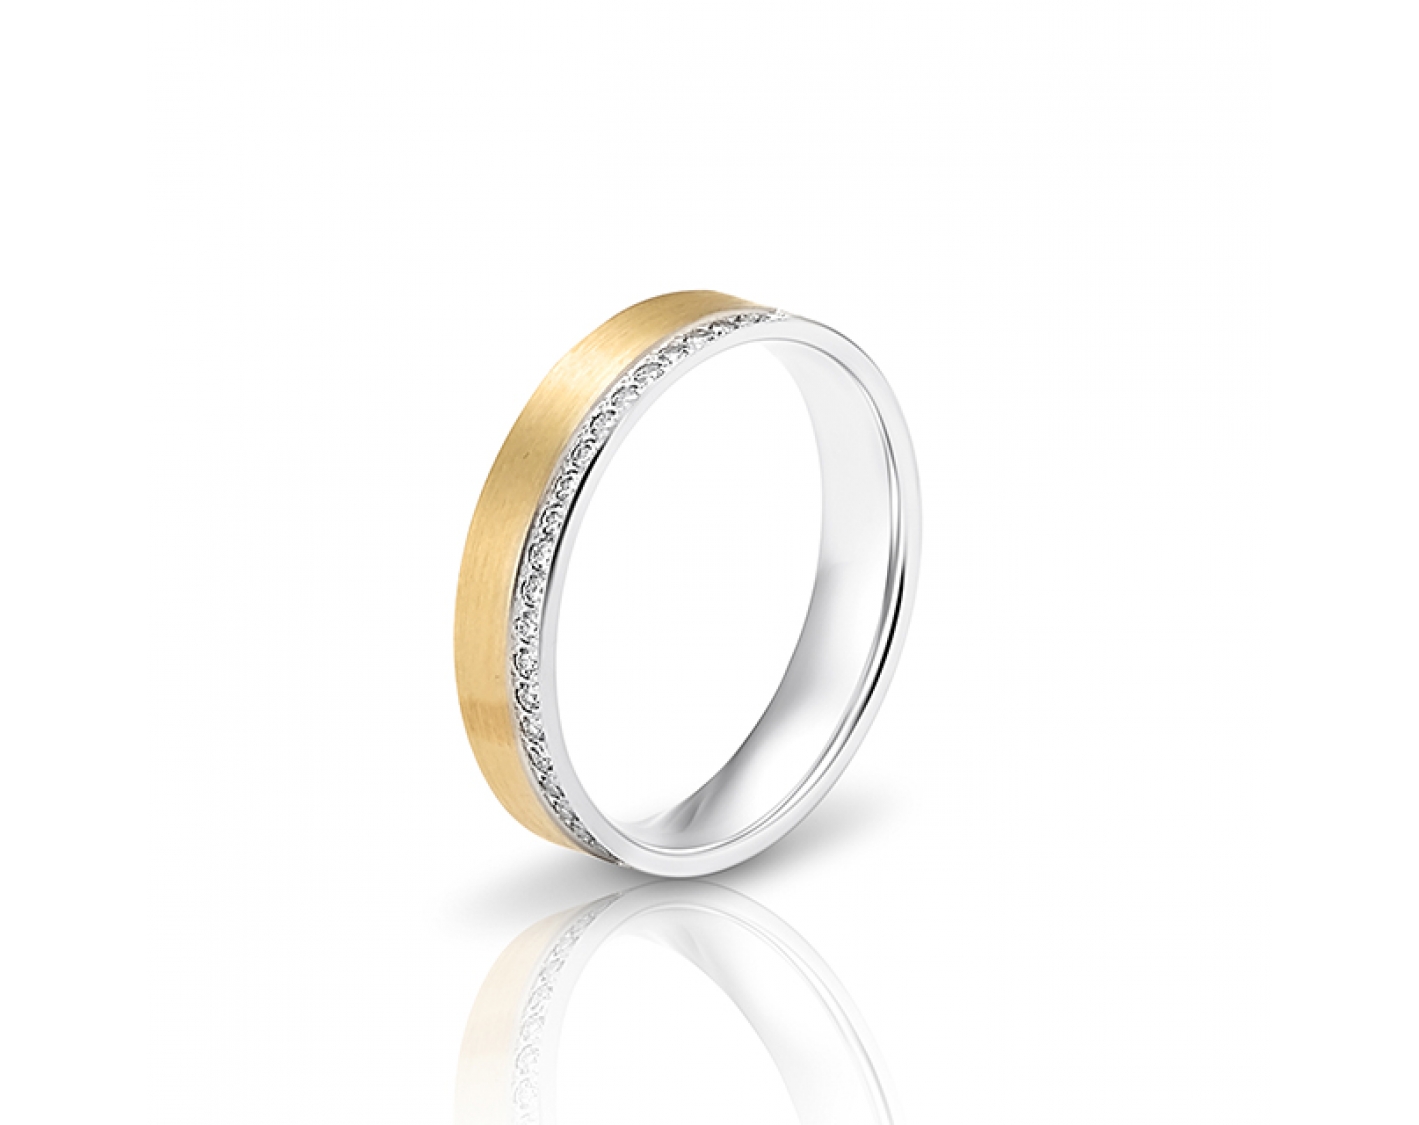 18k yellow gold 4,5mm two-toned* matte half eternity wedding band with a shiny edge